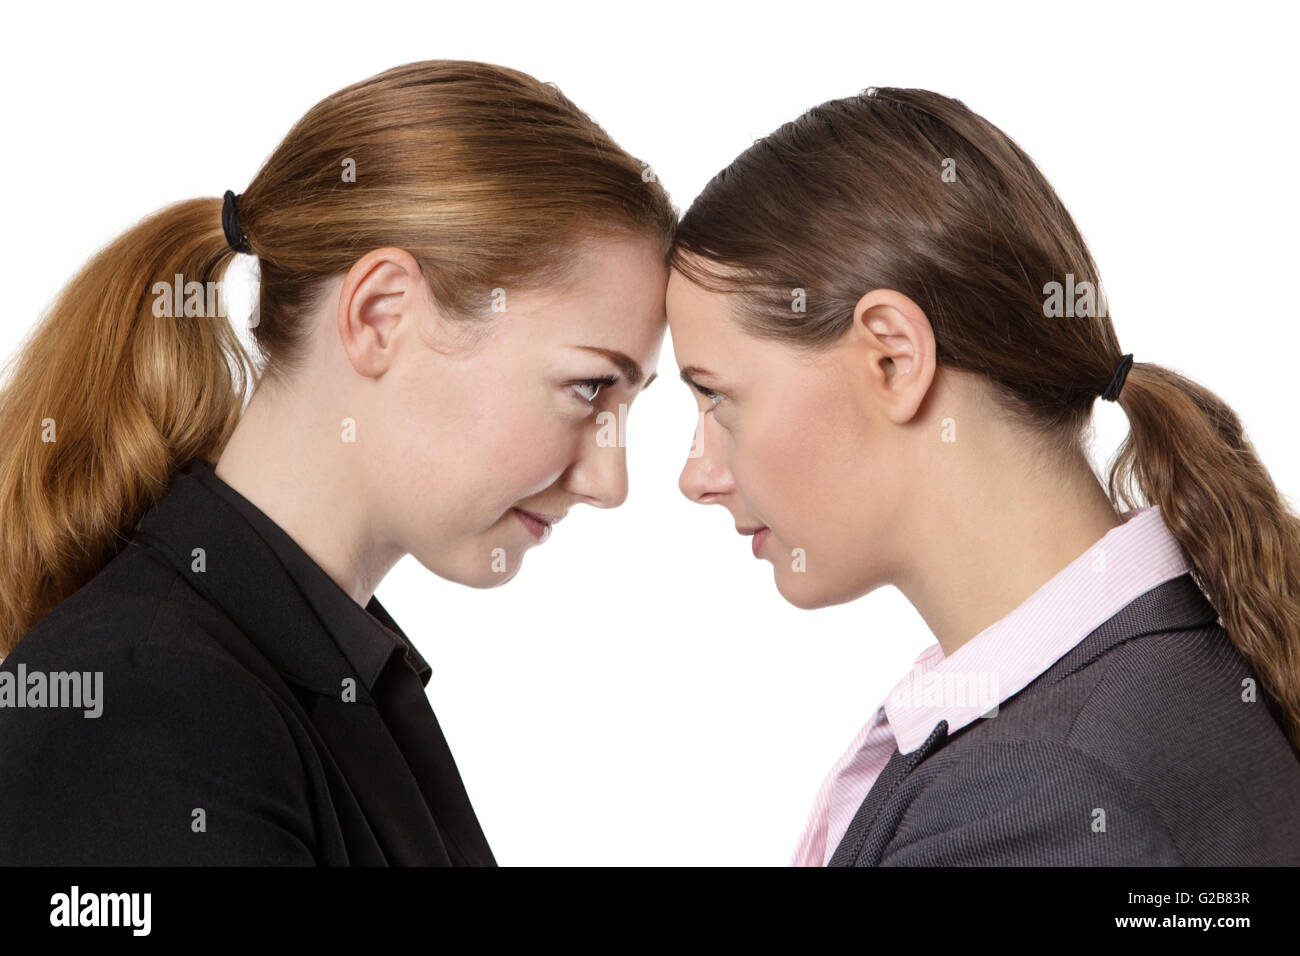 Close up office shot of two businesswomen knocking their heads together. Stock Photo